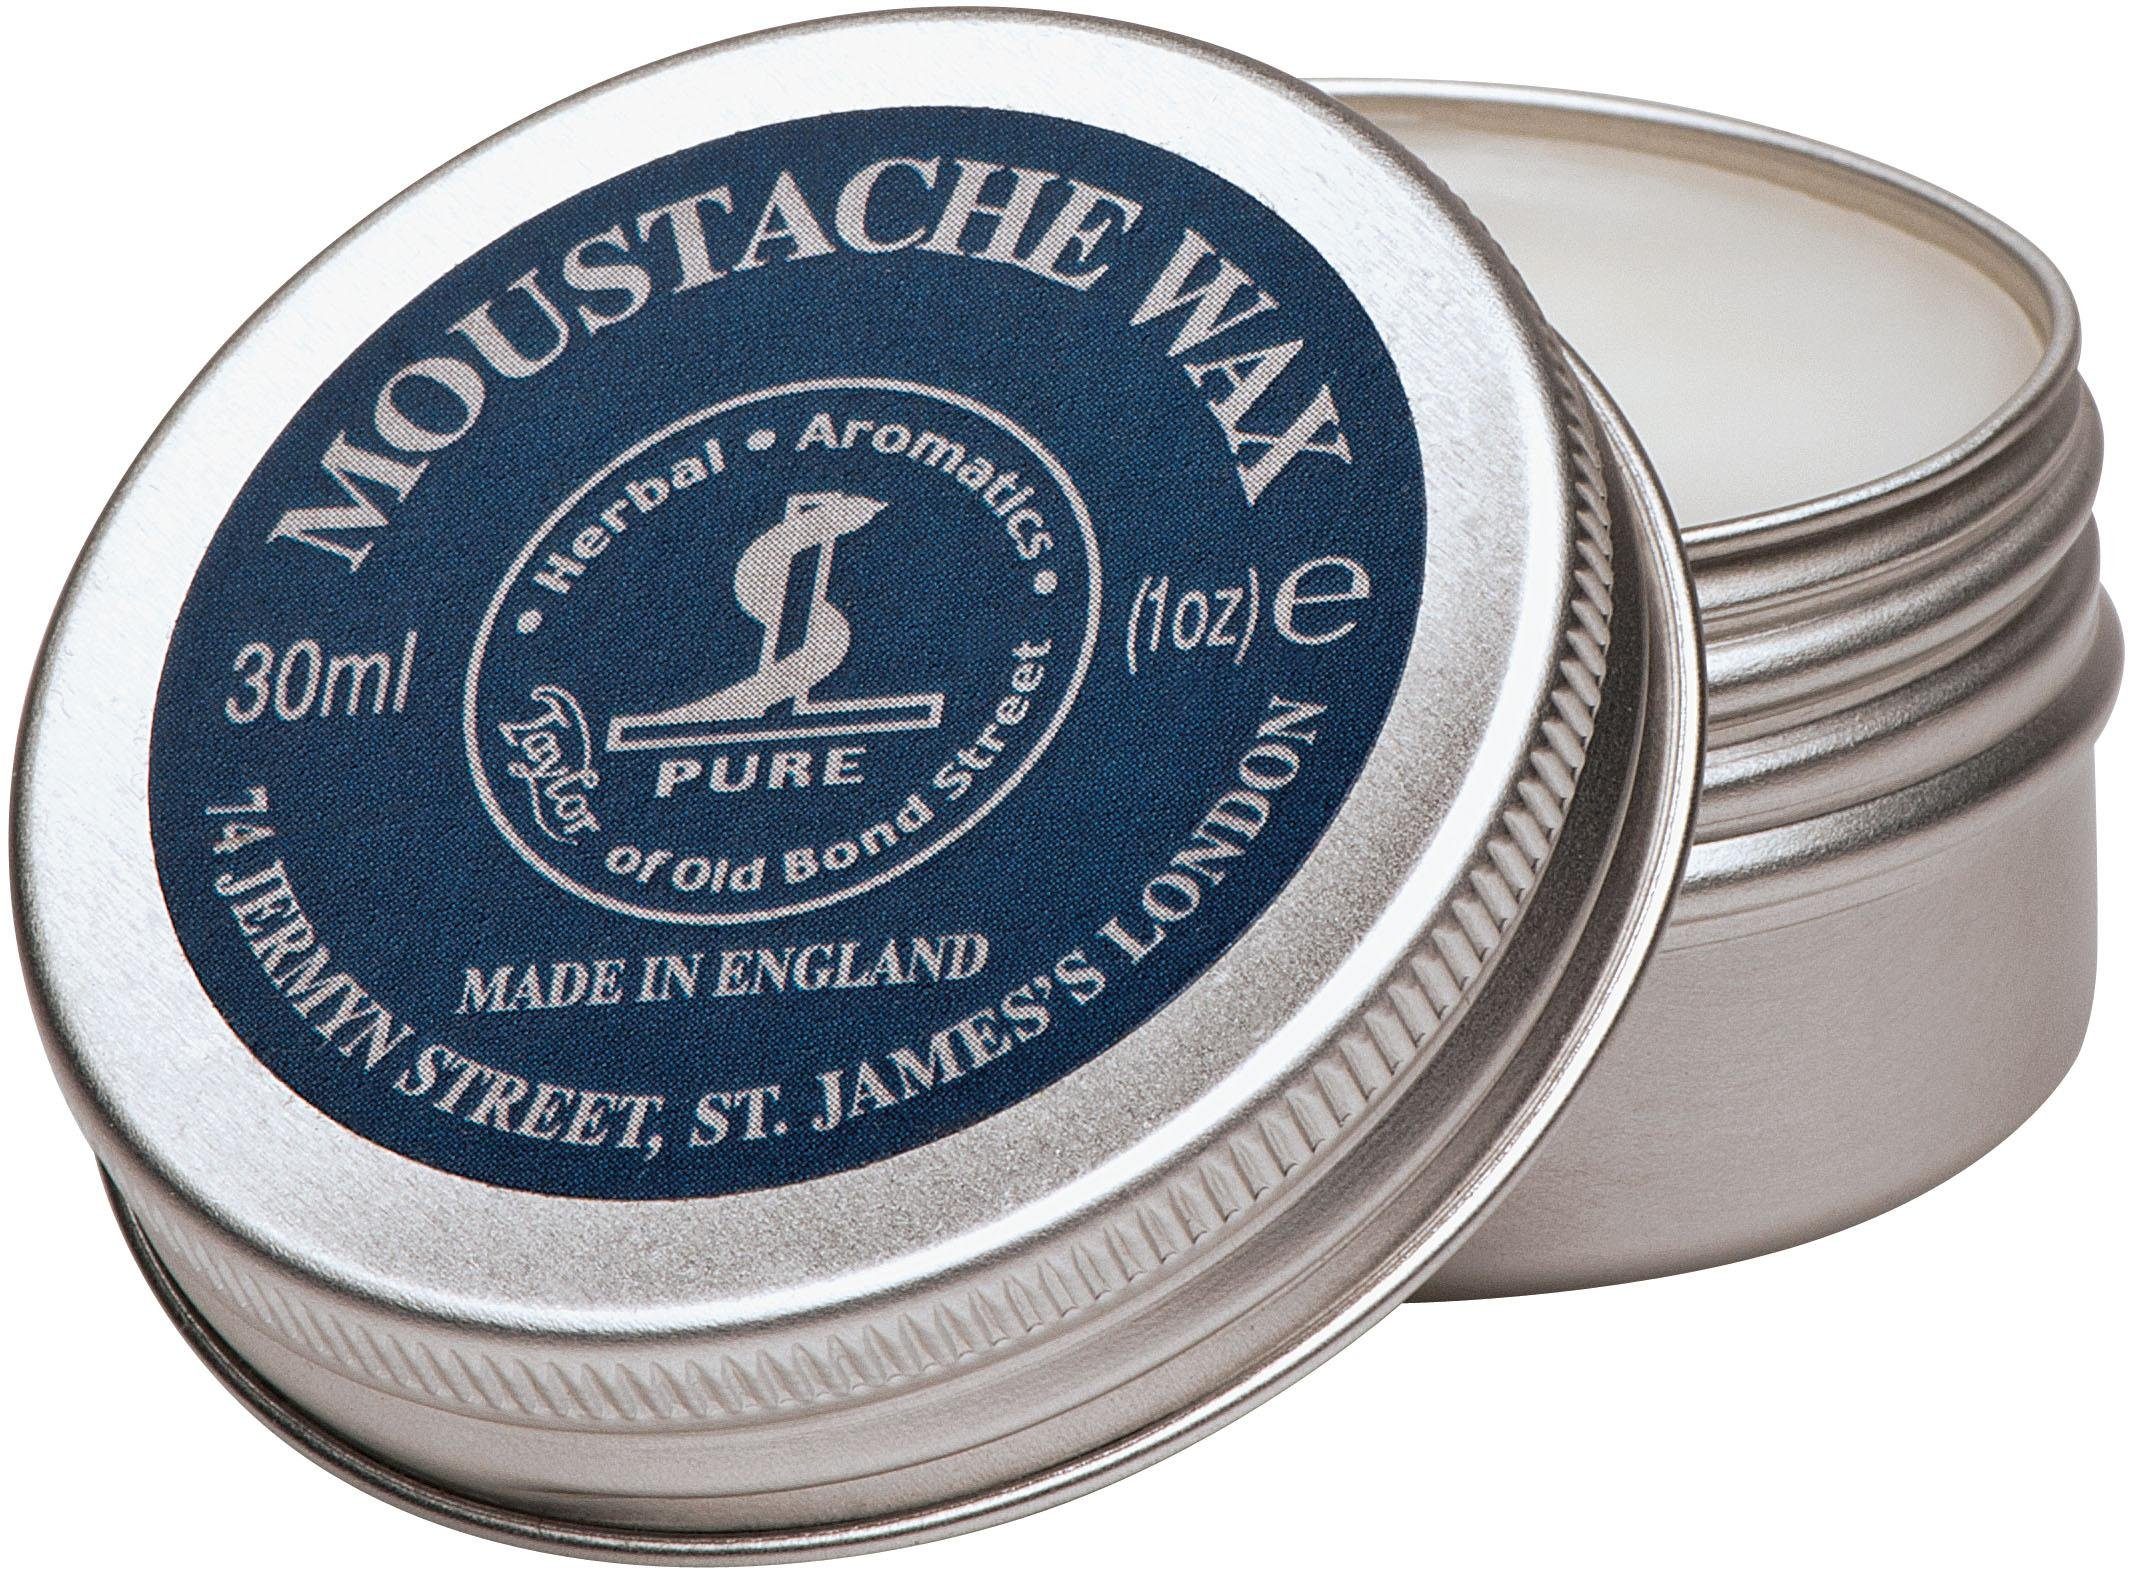 Bartwachs Bond Taylor Old Bartstyling, Bartpomade Moustache Street of Wax,